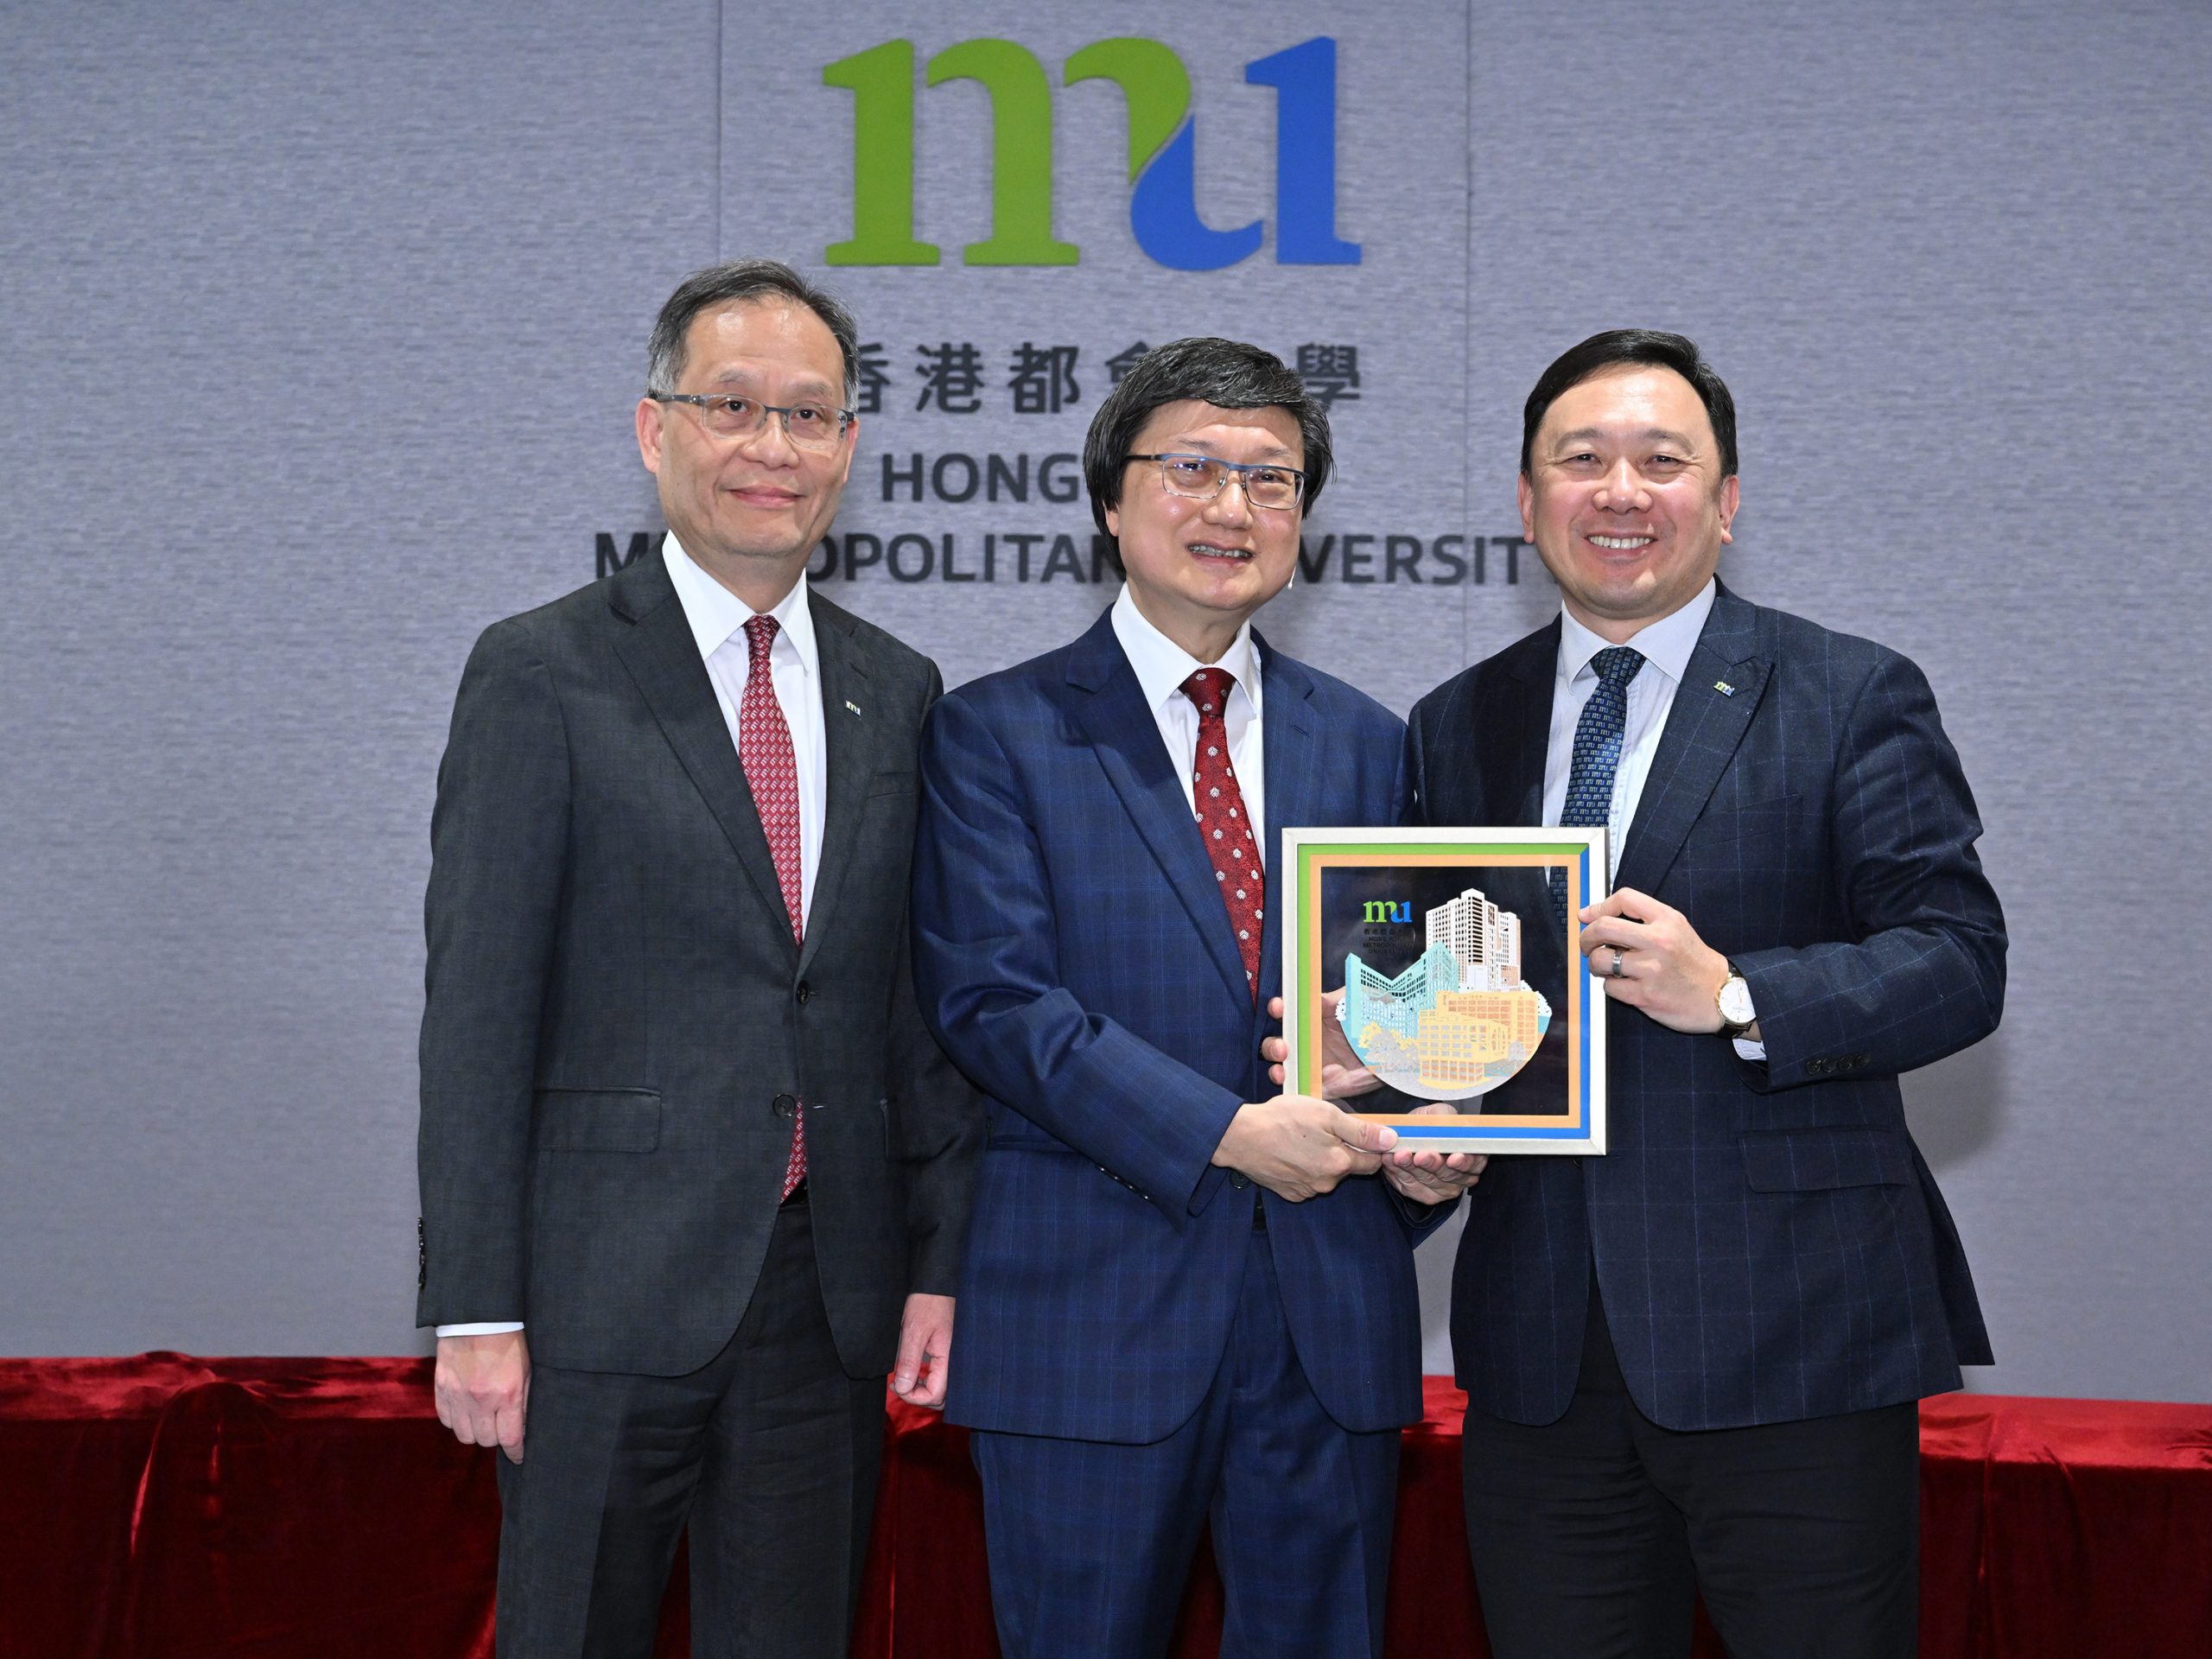 HKMU Council Chairman Ir Dr Conrad Wong Tin-cheung (right) and President Prof. Paul Lam Kwan-sing (left) present souvenirs to the speaker, Mr Franklin Lam.